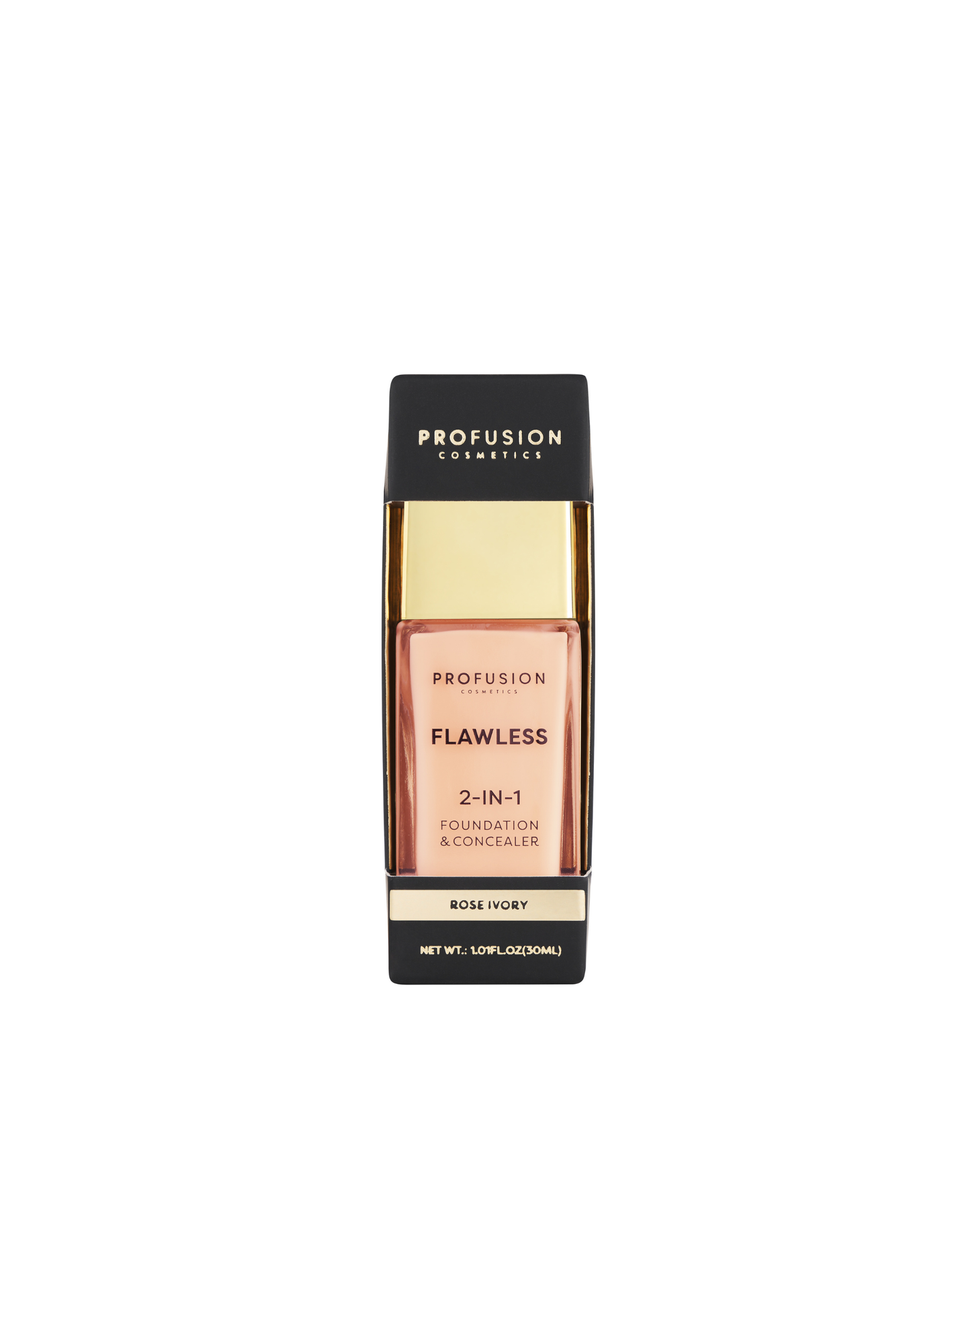 Profusion Cosmetics Flawless 2-in-1 Foundation & Concealer Rose Ivory